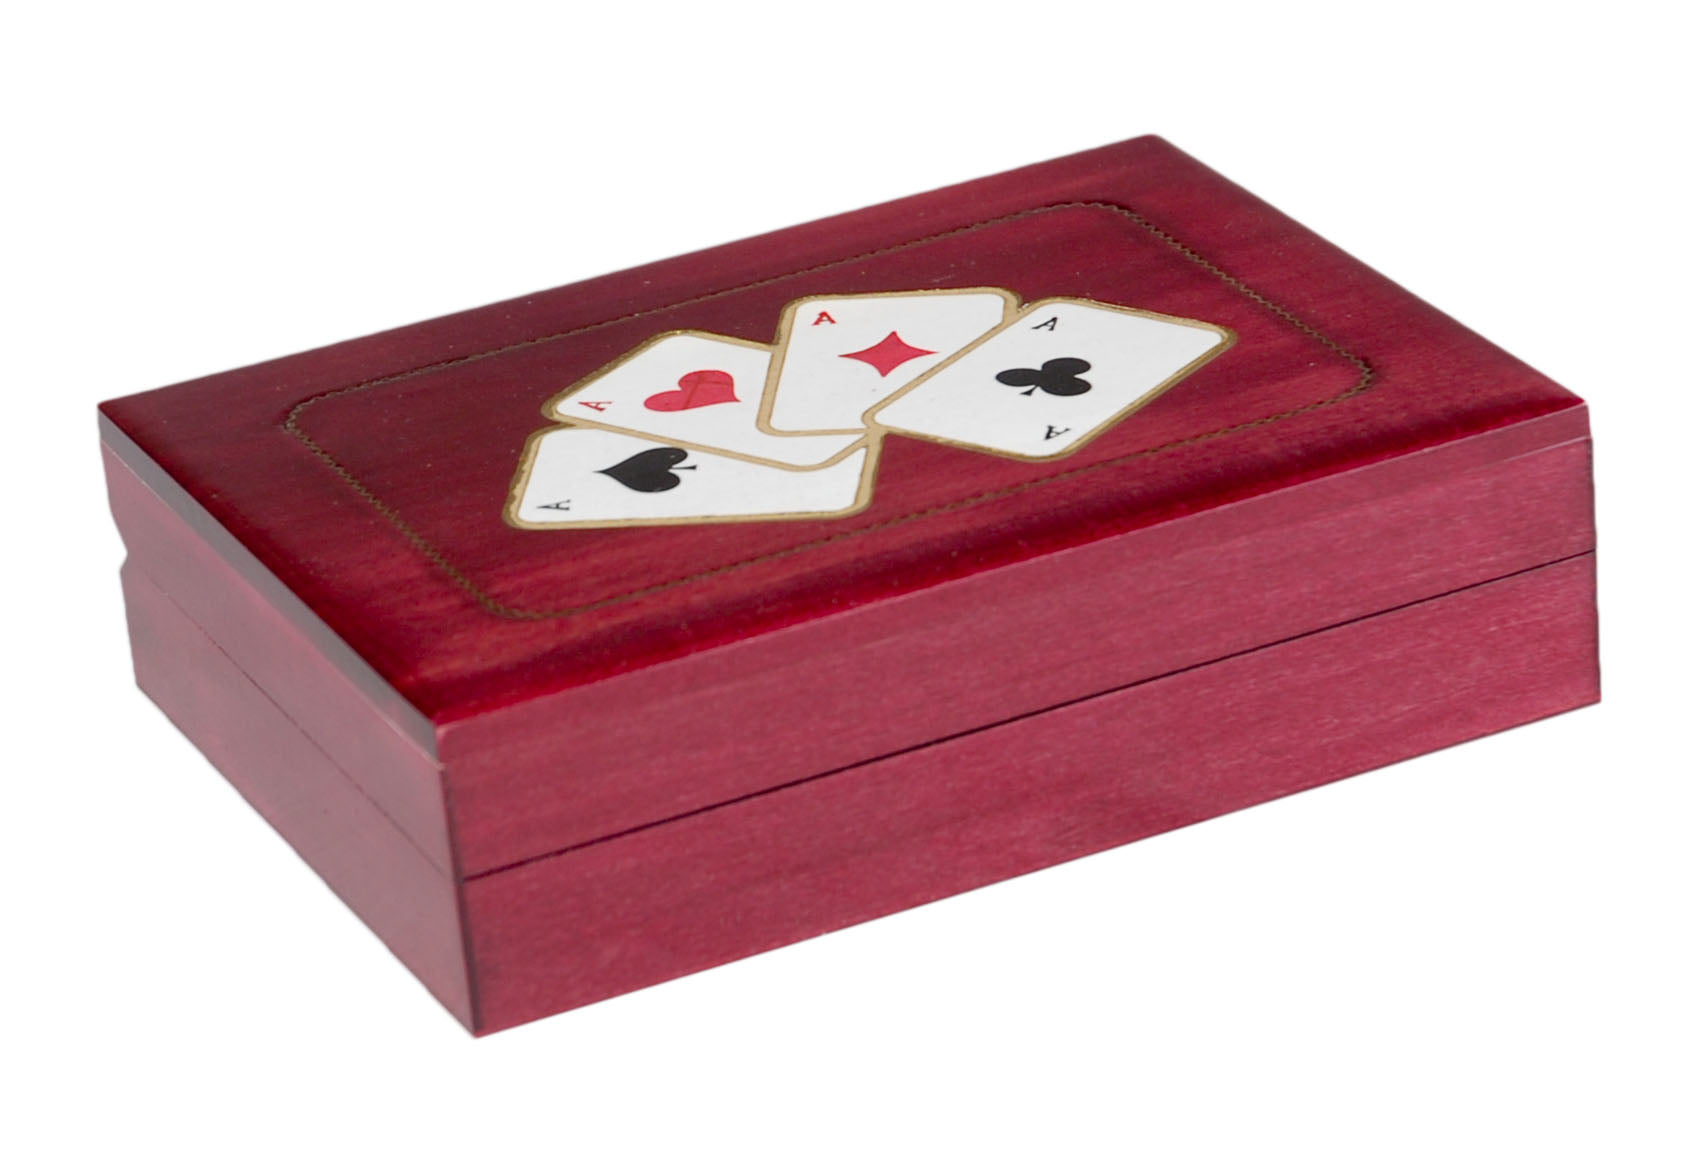 Wooden Card Box - Aces Wild